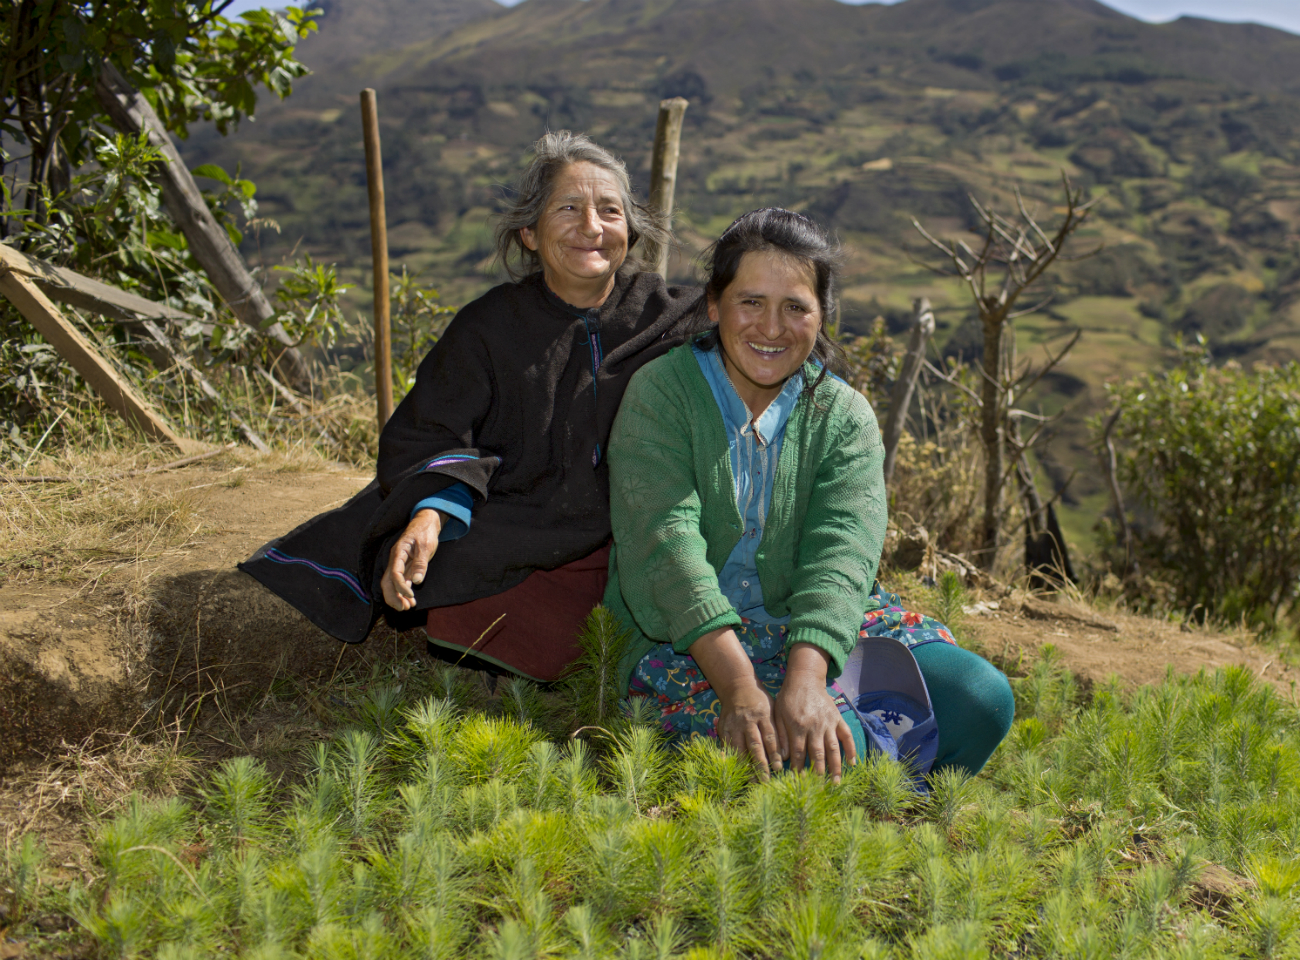 Two cocoa farmers planting trees in Peru